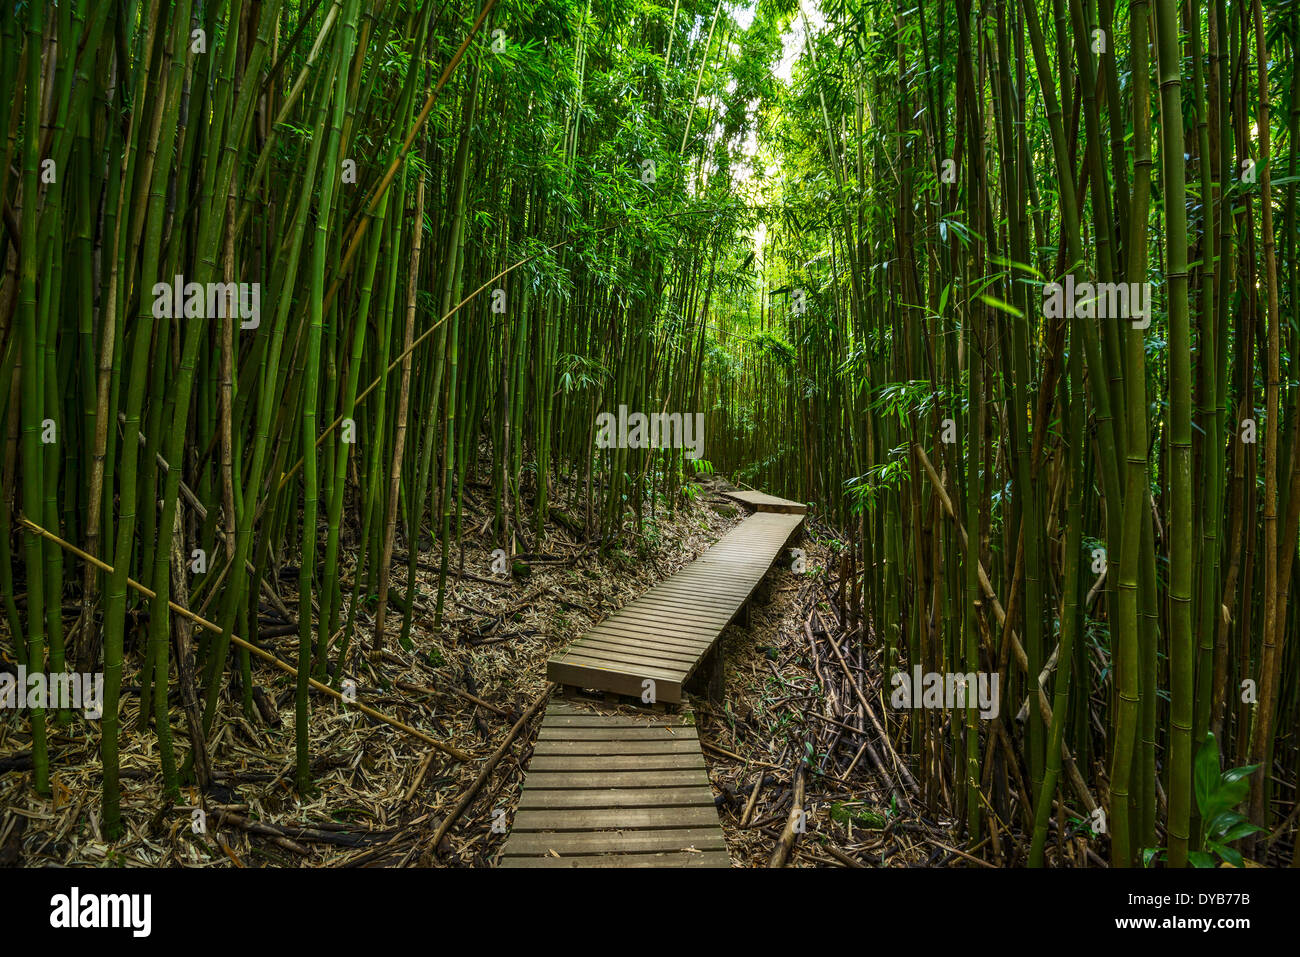 The magical and mysterious bamboo forest of Maui. Stock Photo